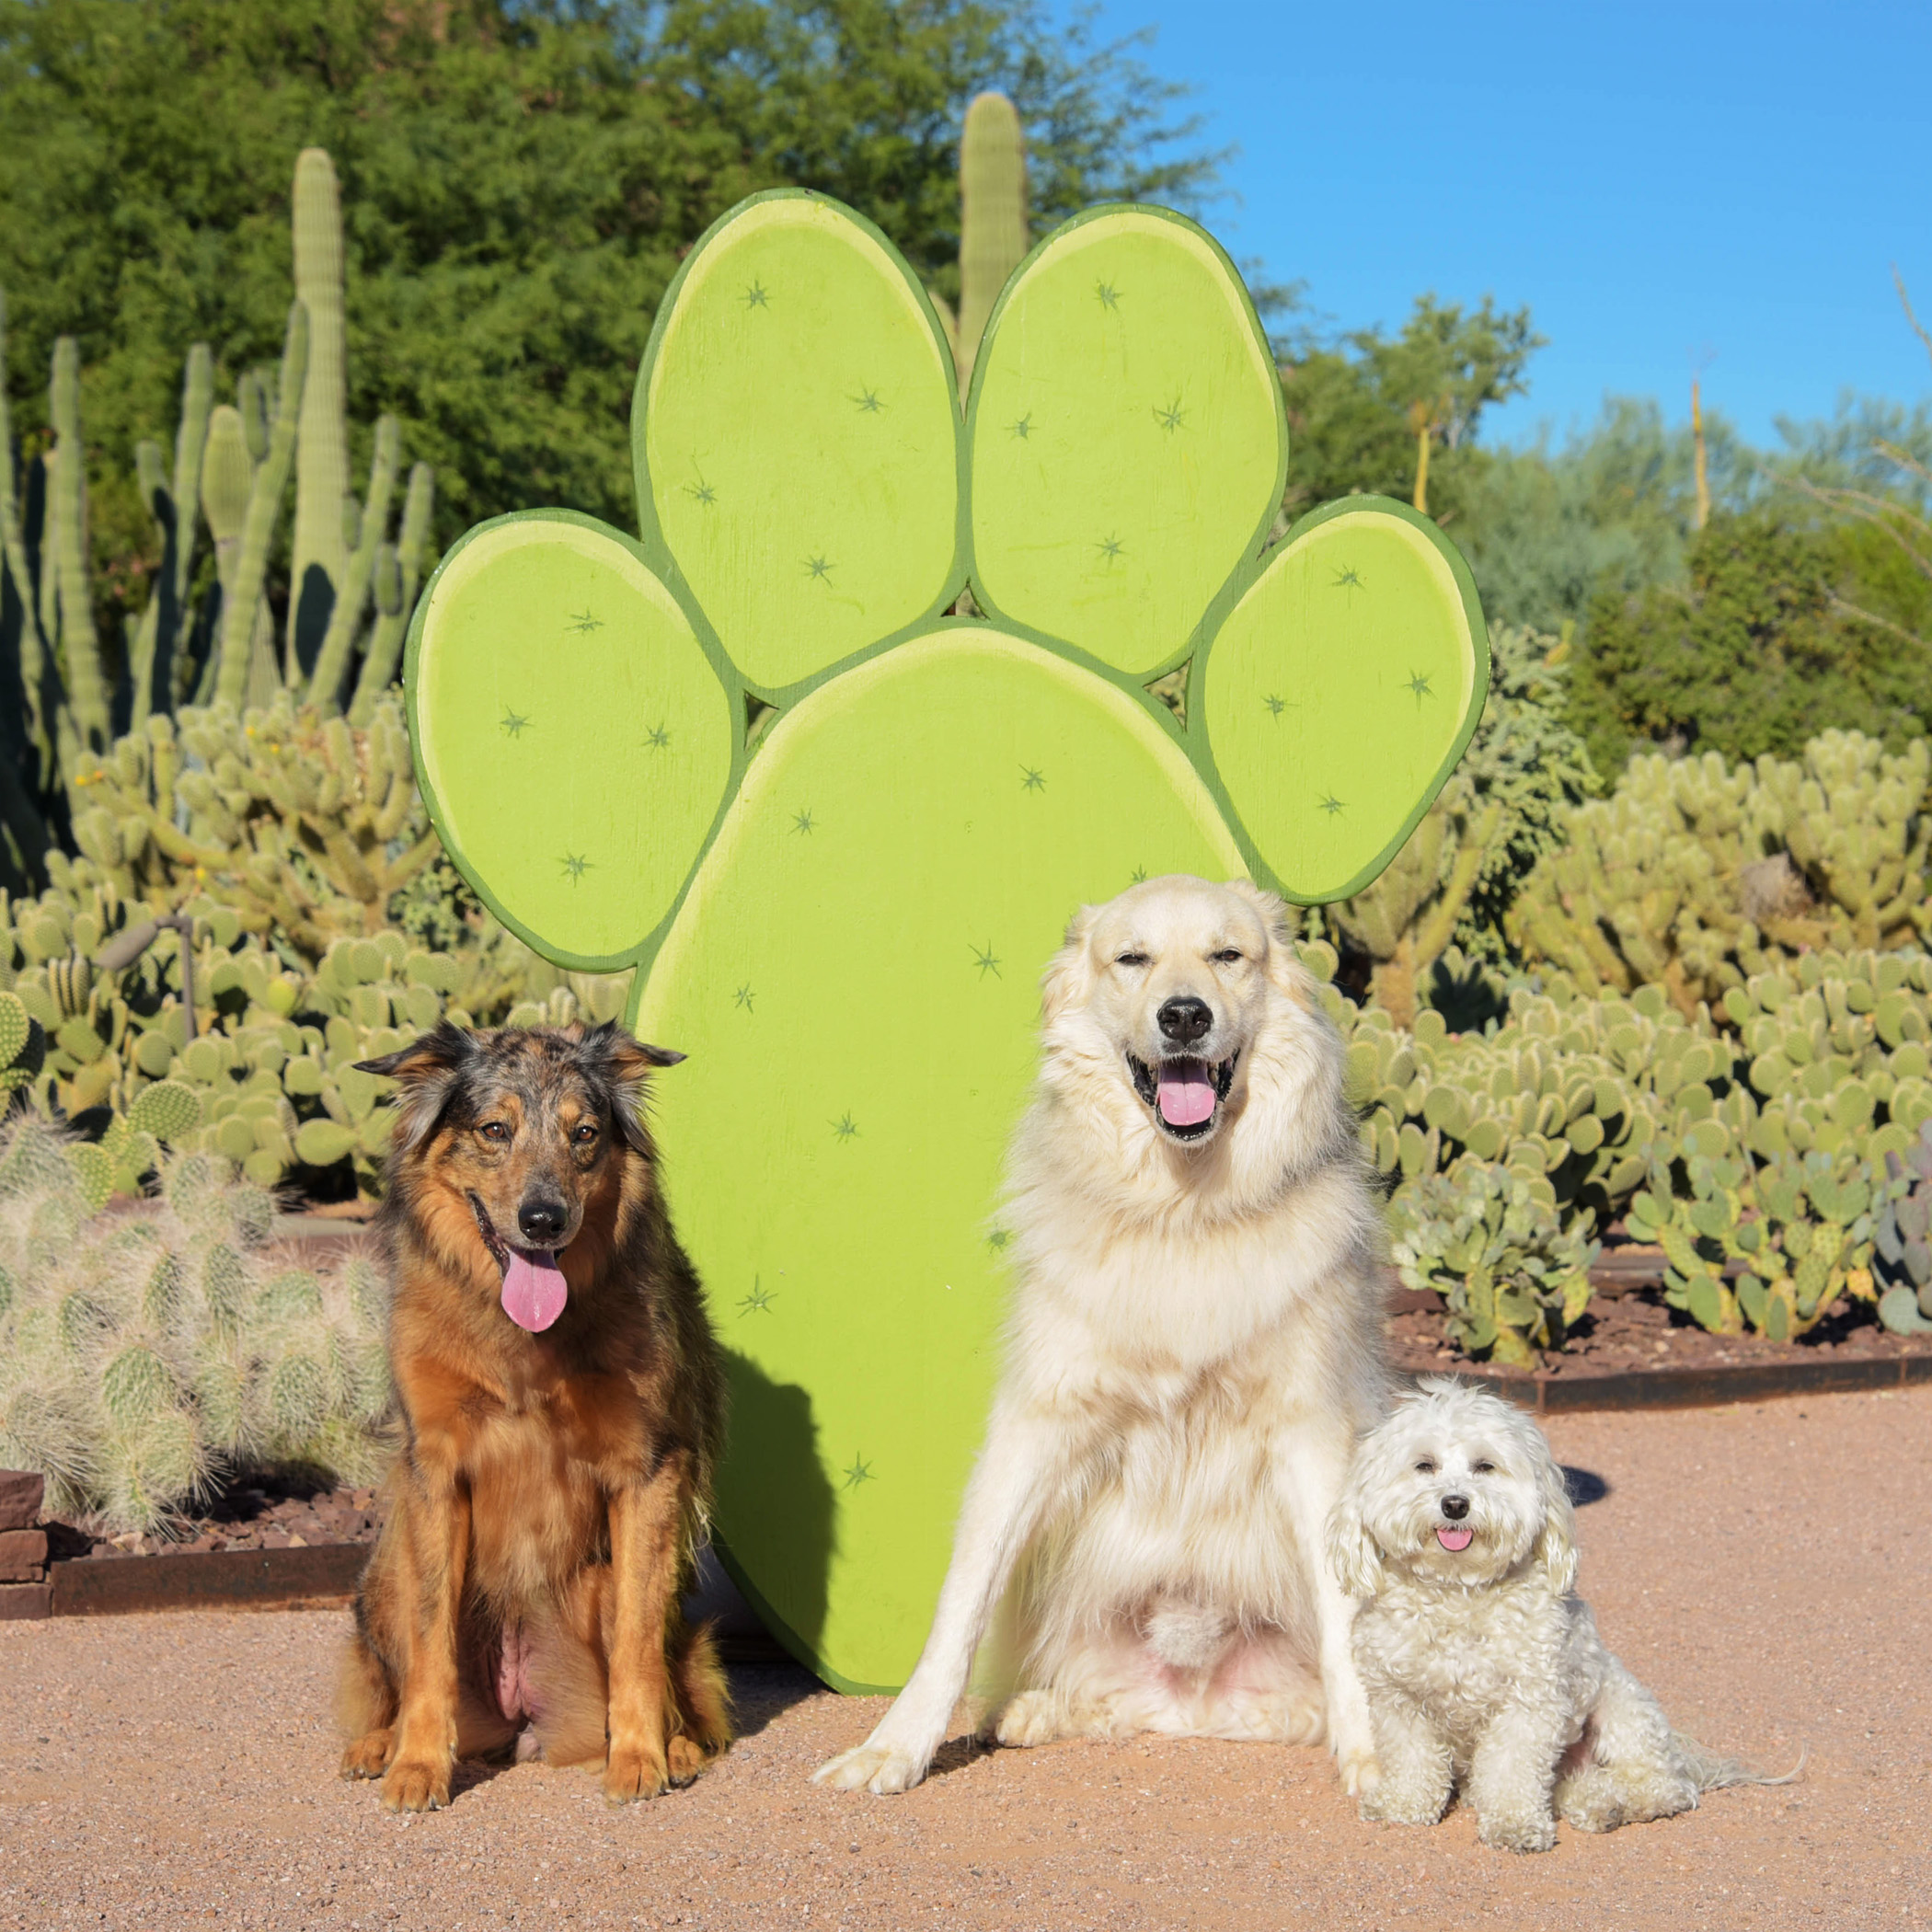  Of course, Bruiser, insisted on posing with the big dogs! He thinks he looks just like them! 